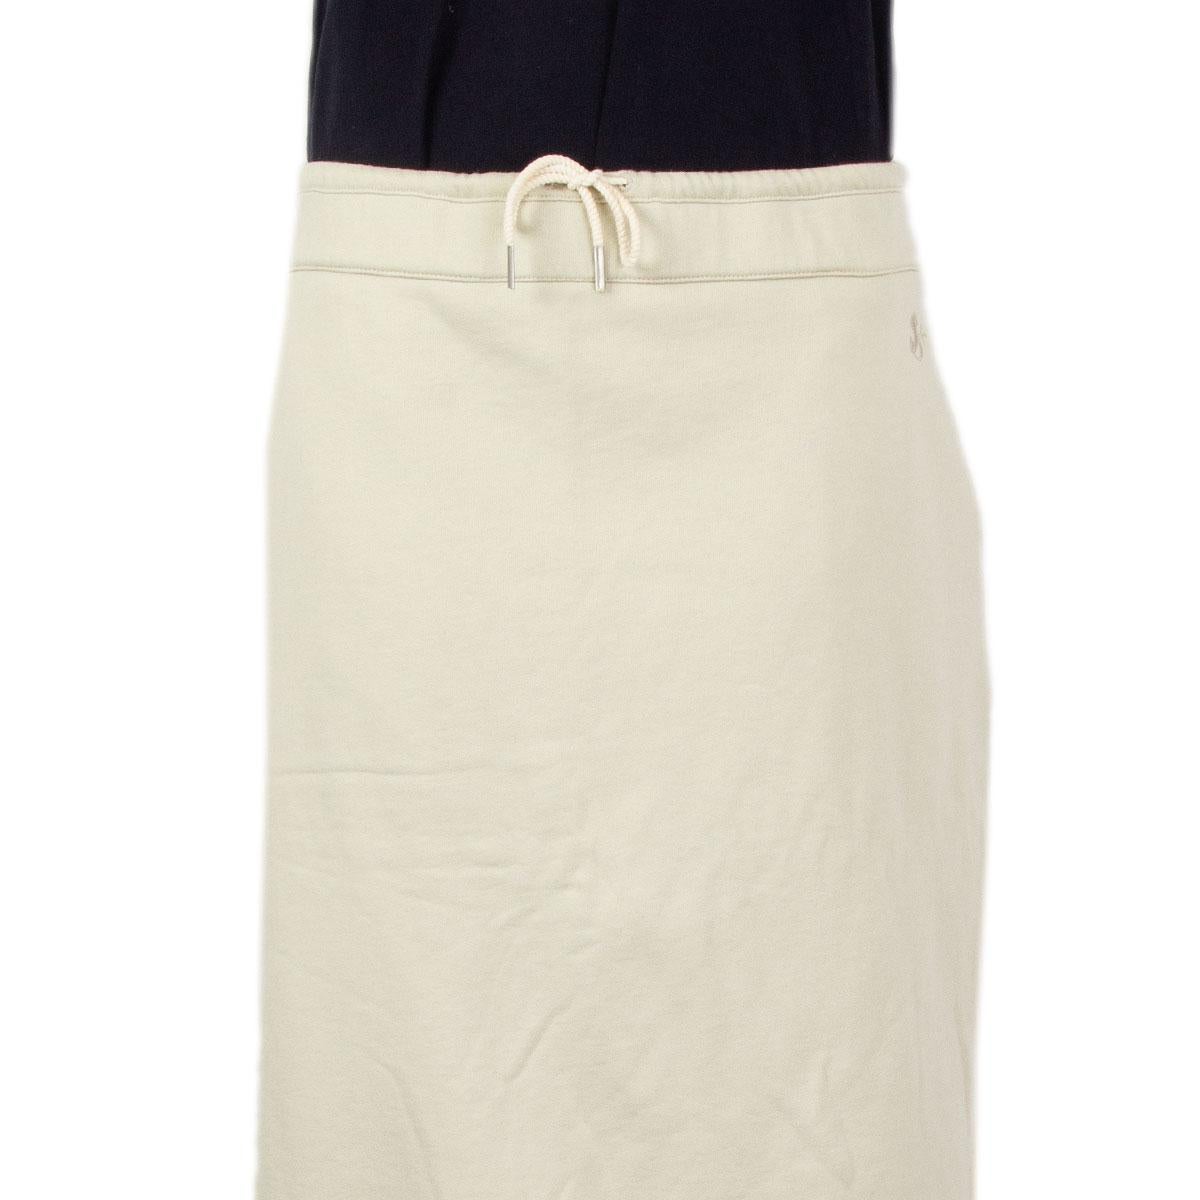 100% authentic Jil Sander jersey skirt in beige cotton (100%) with drawstring at the waist. Comes in a straight cut, two side pocktes, and two side slits. Has been worn and is in excellent condition. Comes with a matching sweater.

Measurements
Tag